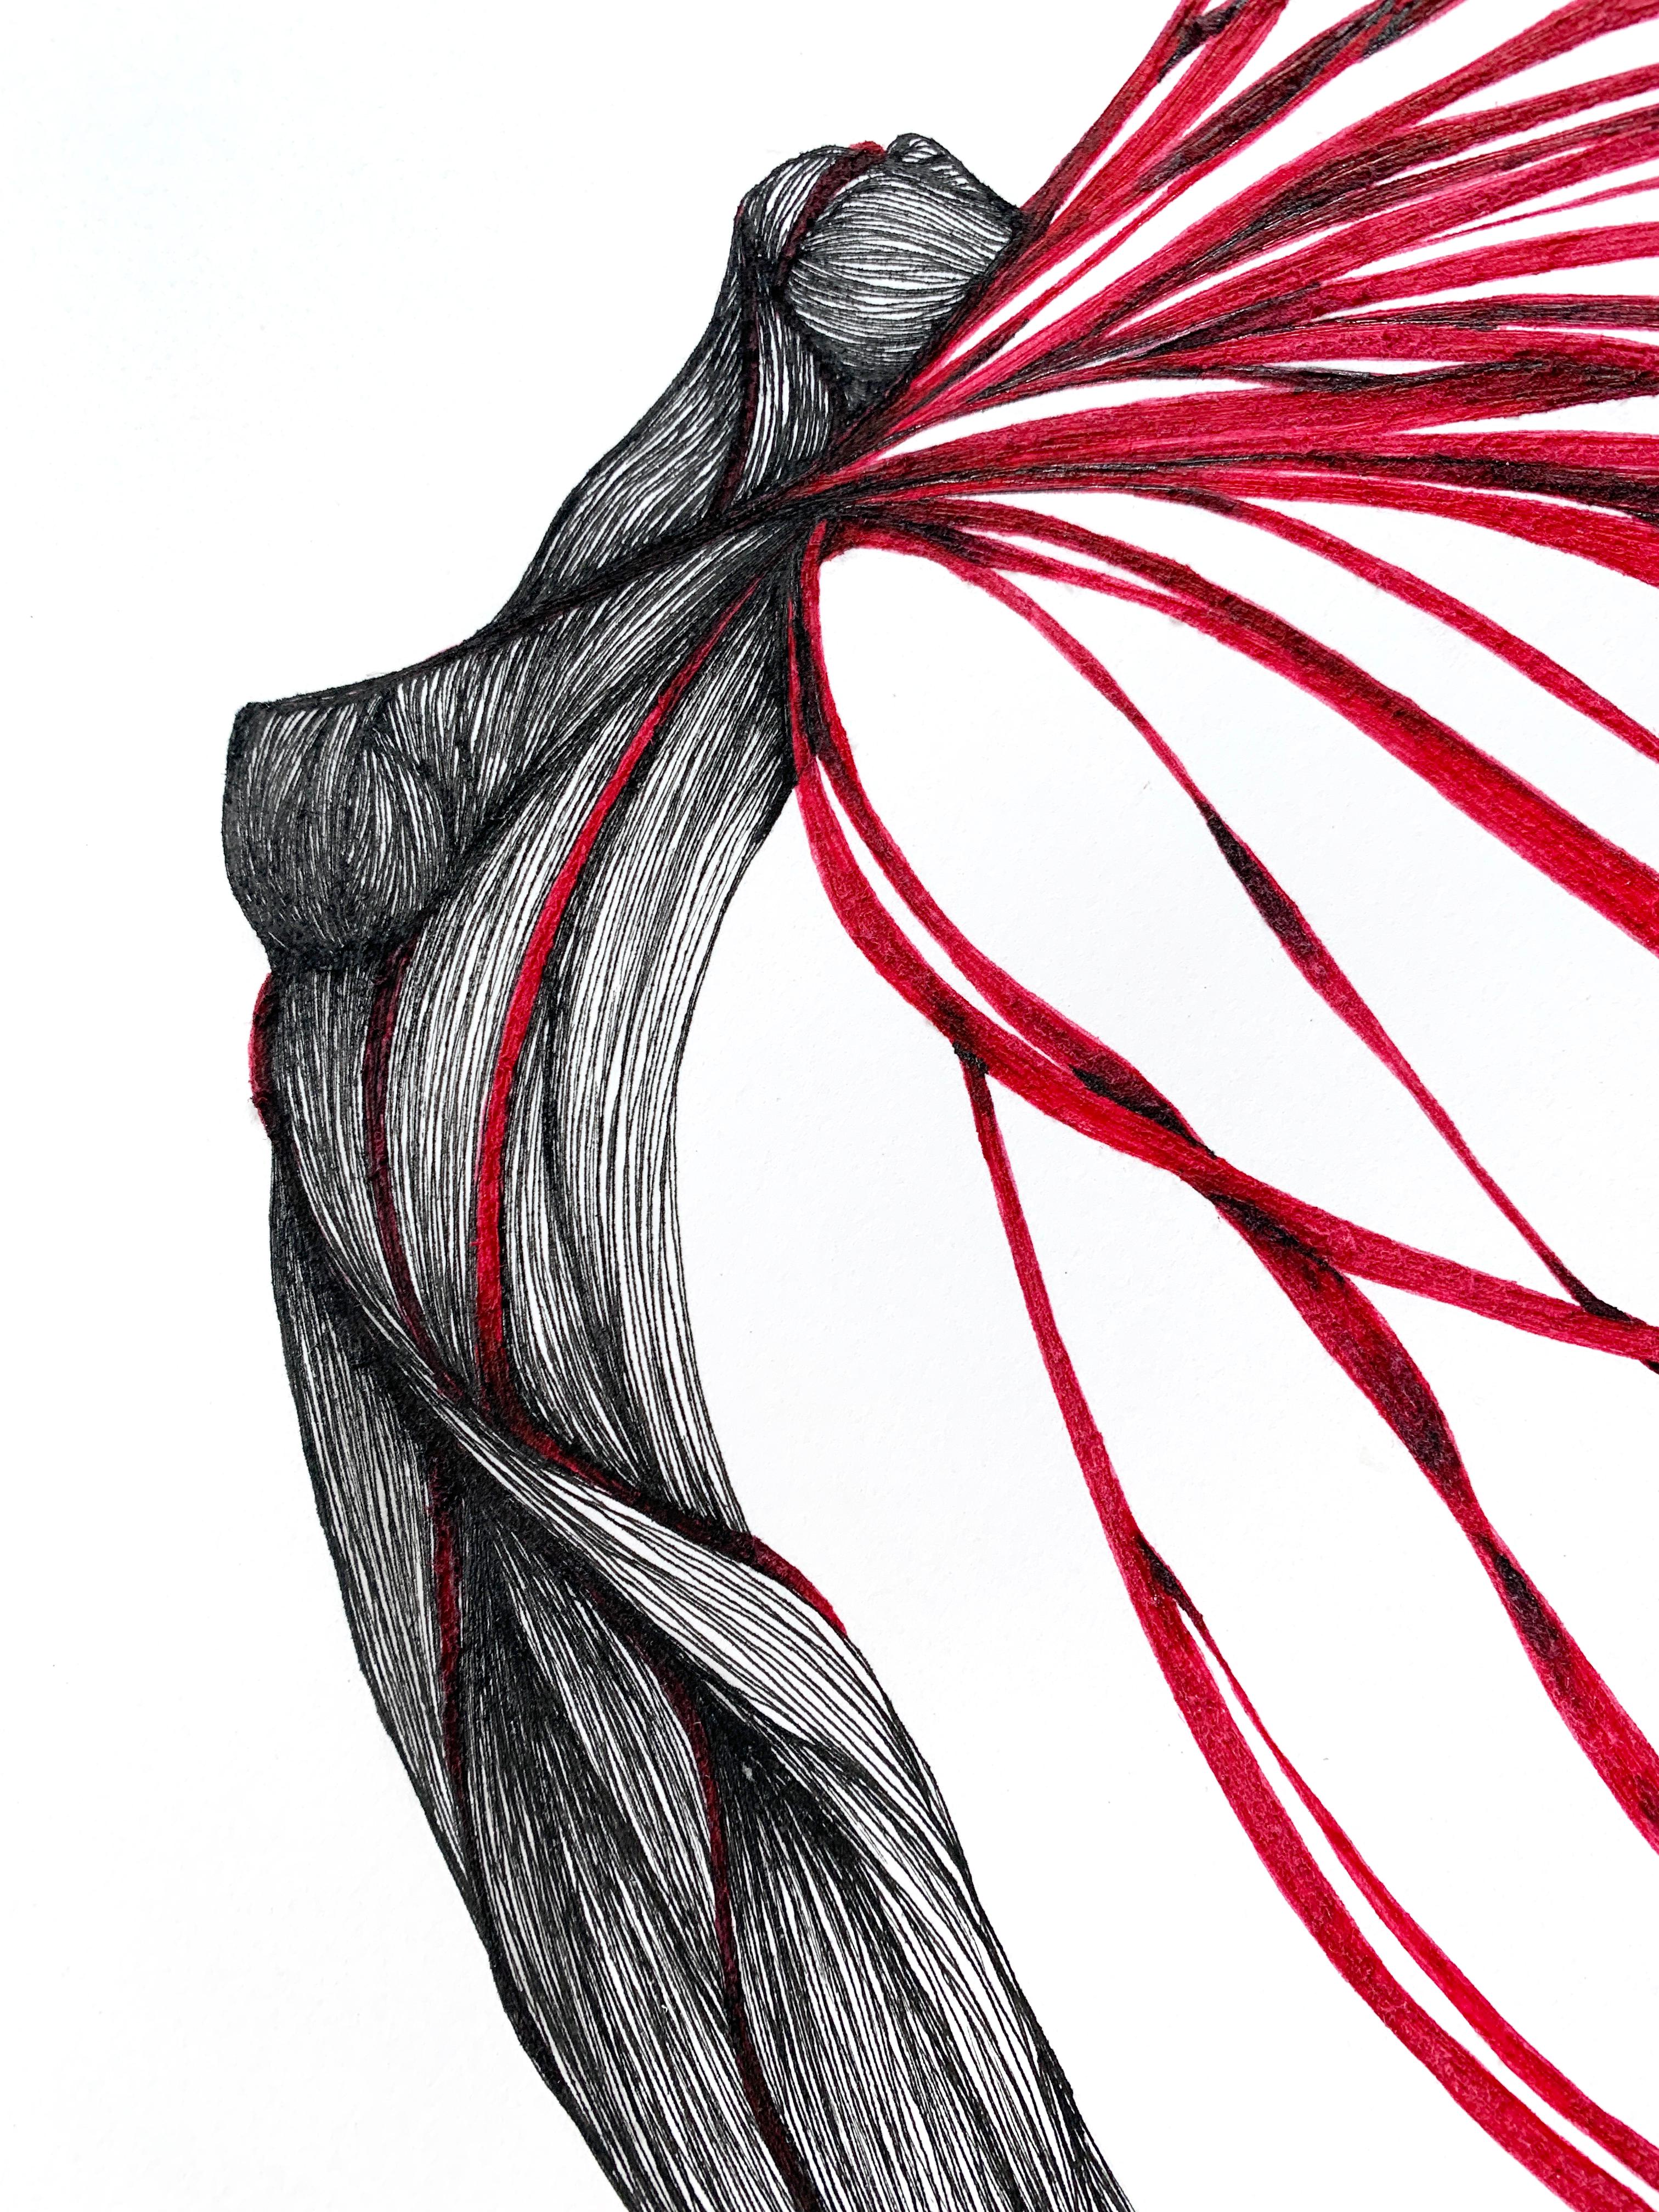 Garden Party VII  - Pen, Ink, Black White and Red Drawing of Female Figure 1